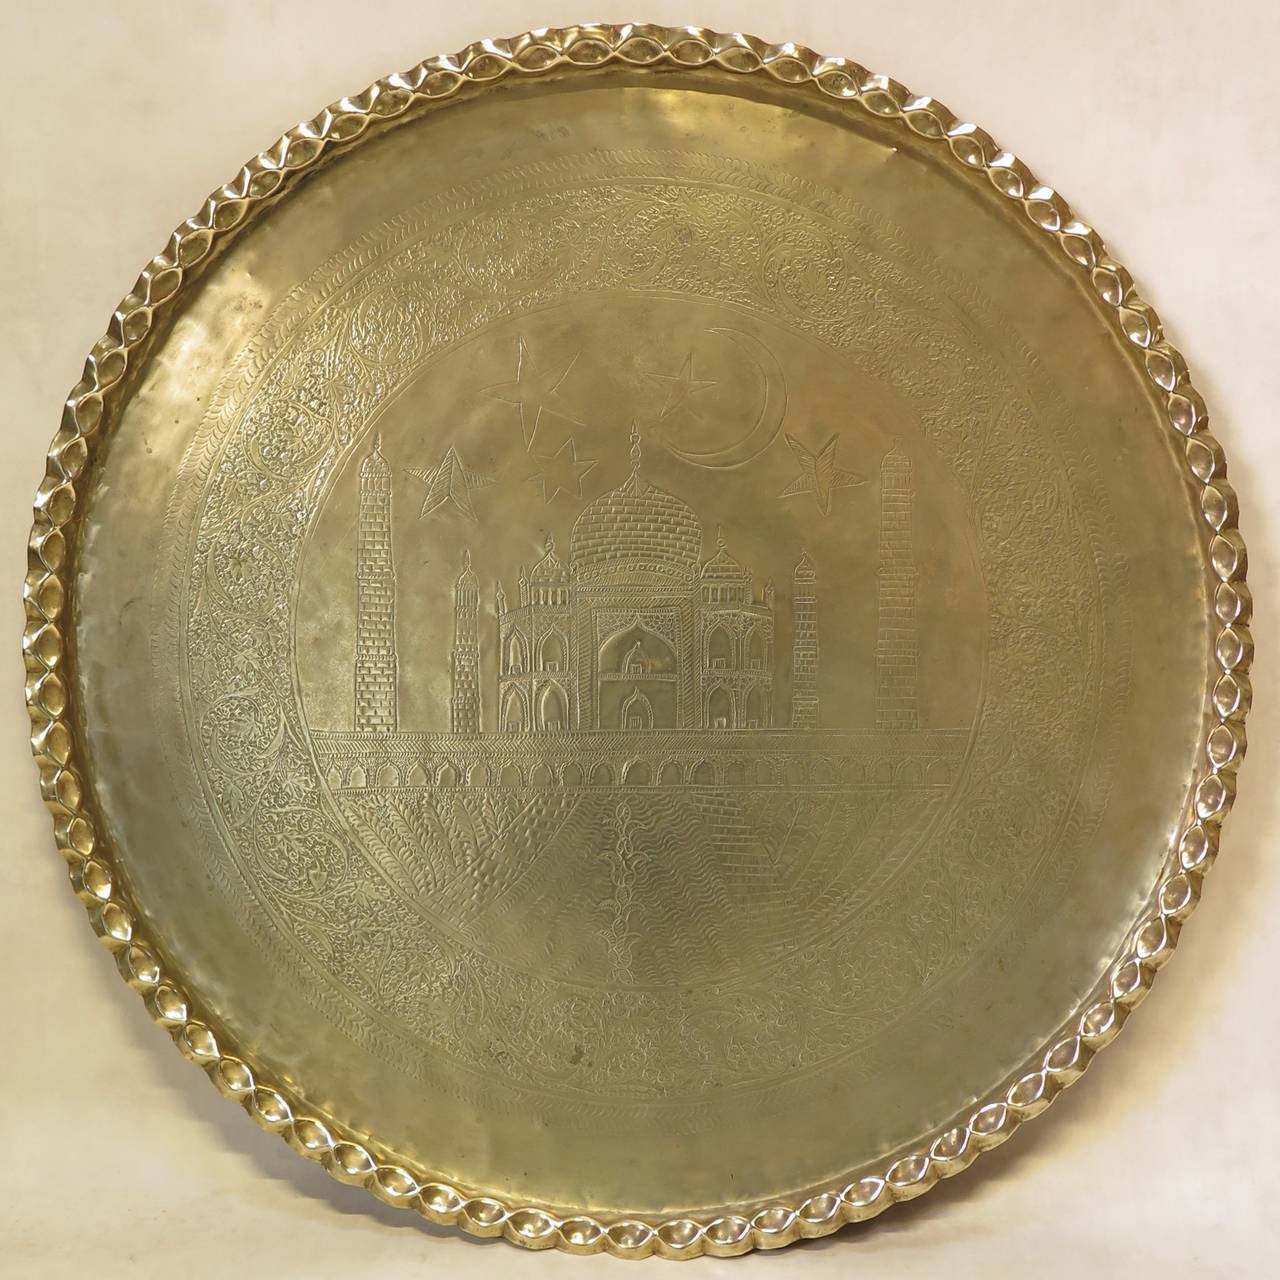 Very large brass tray, hand-hammered and chiselled, with a floral frieze surrounding a central medallion representing the Taj Mahal beneath a starry and moonlit sky. Pie-crust edge.

Could be used either as a coffee table top, or as a wall